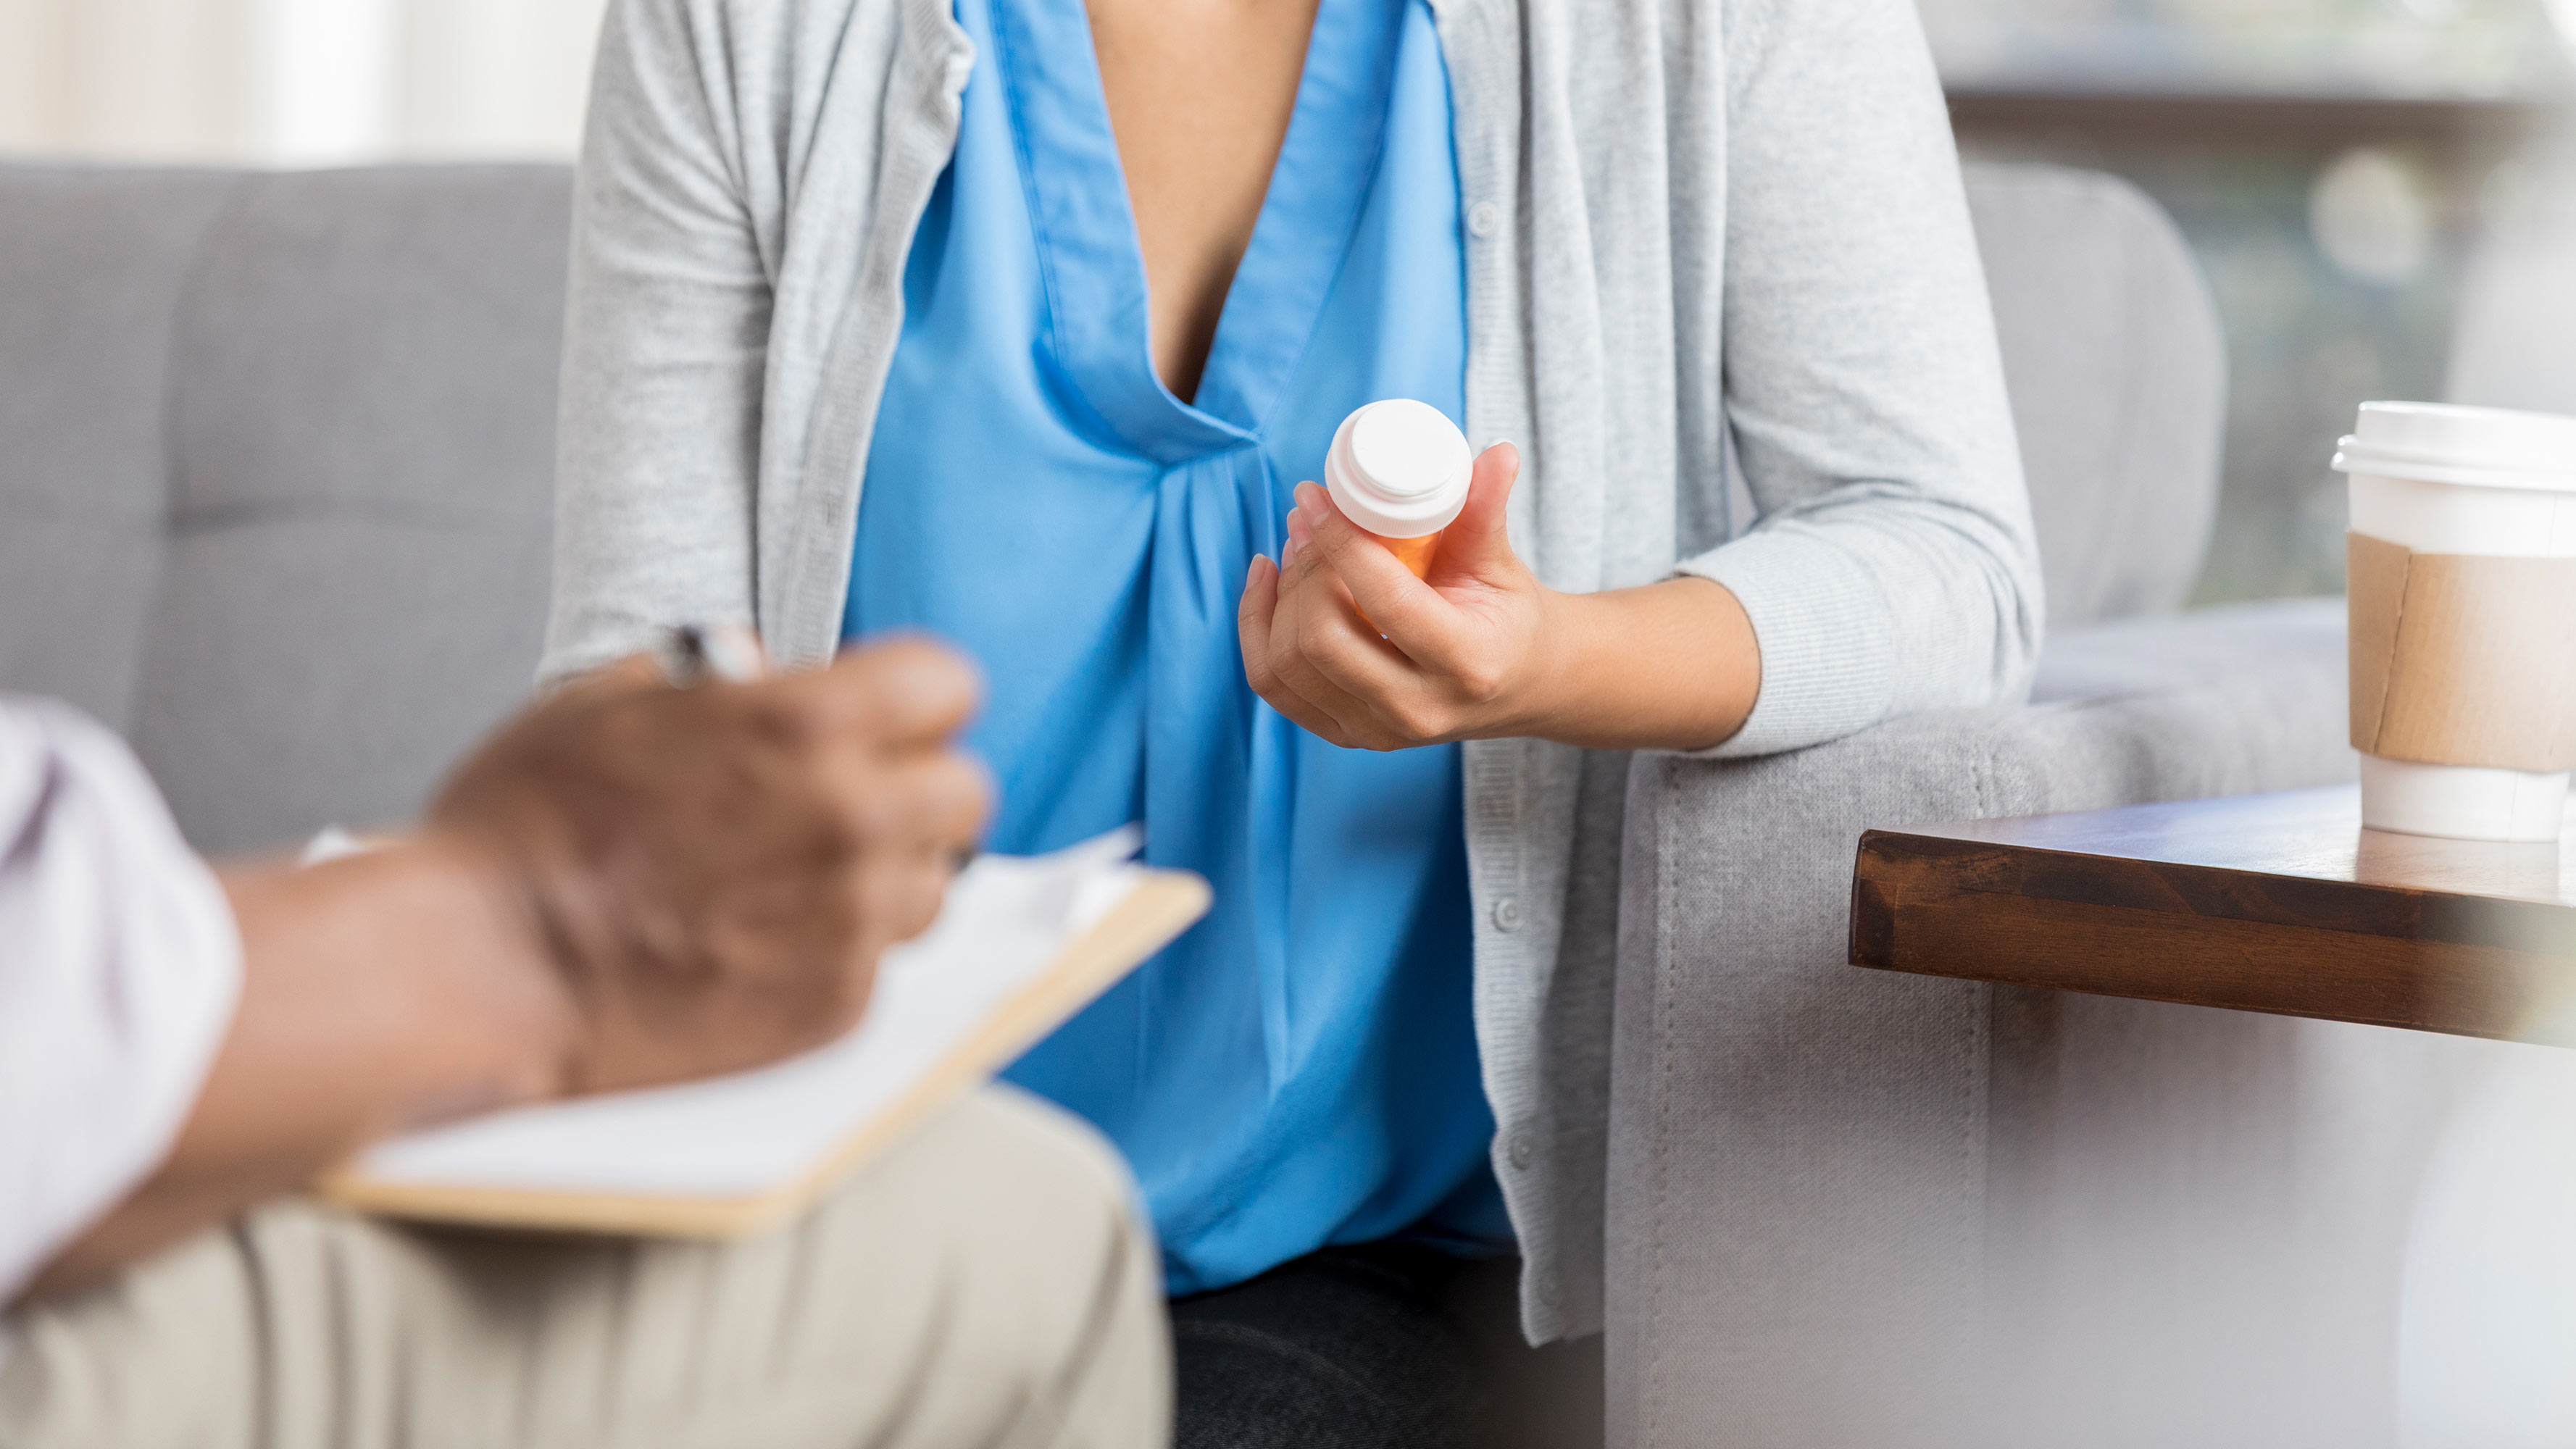 A prescriber counsels an unknown patient about a medication.